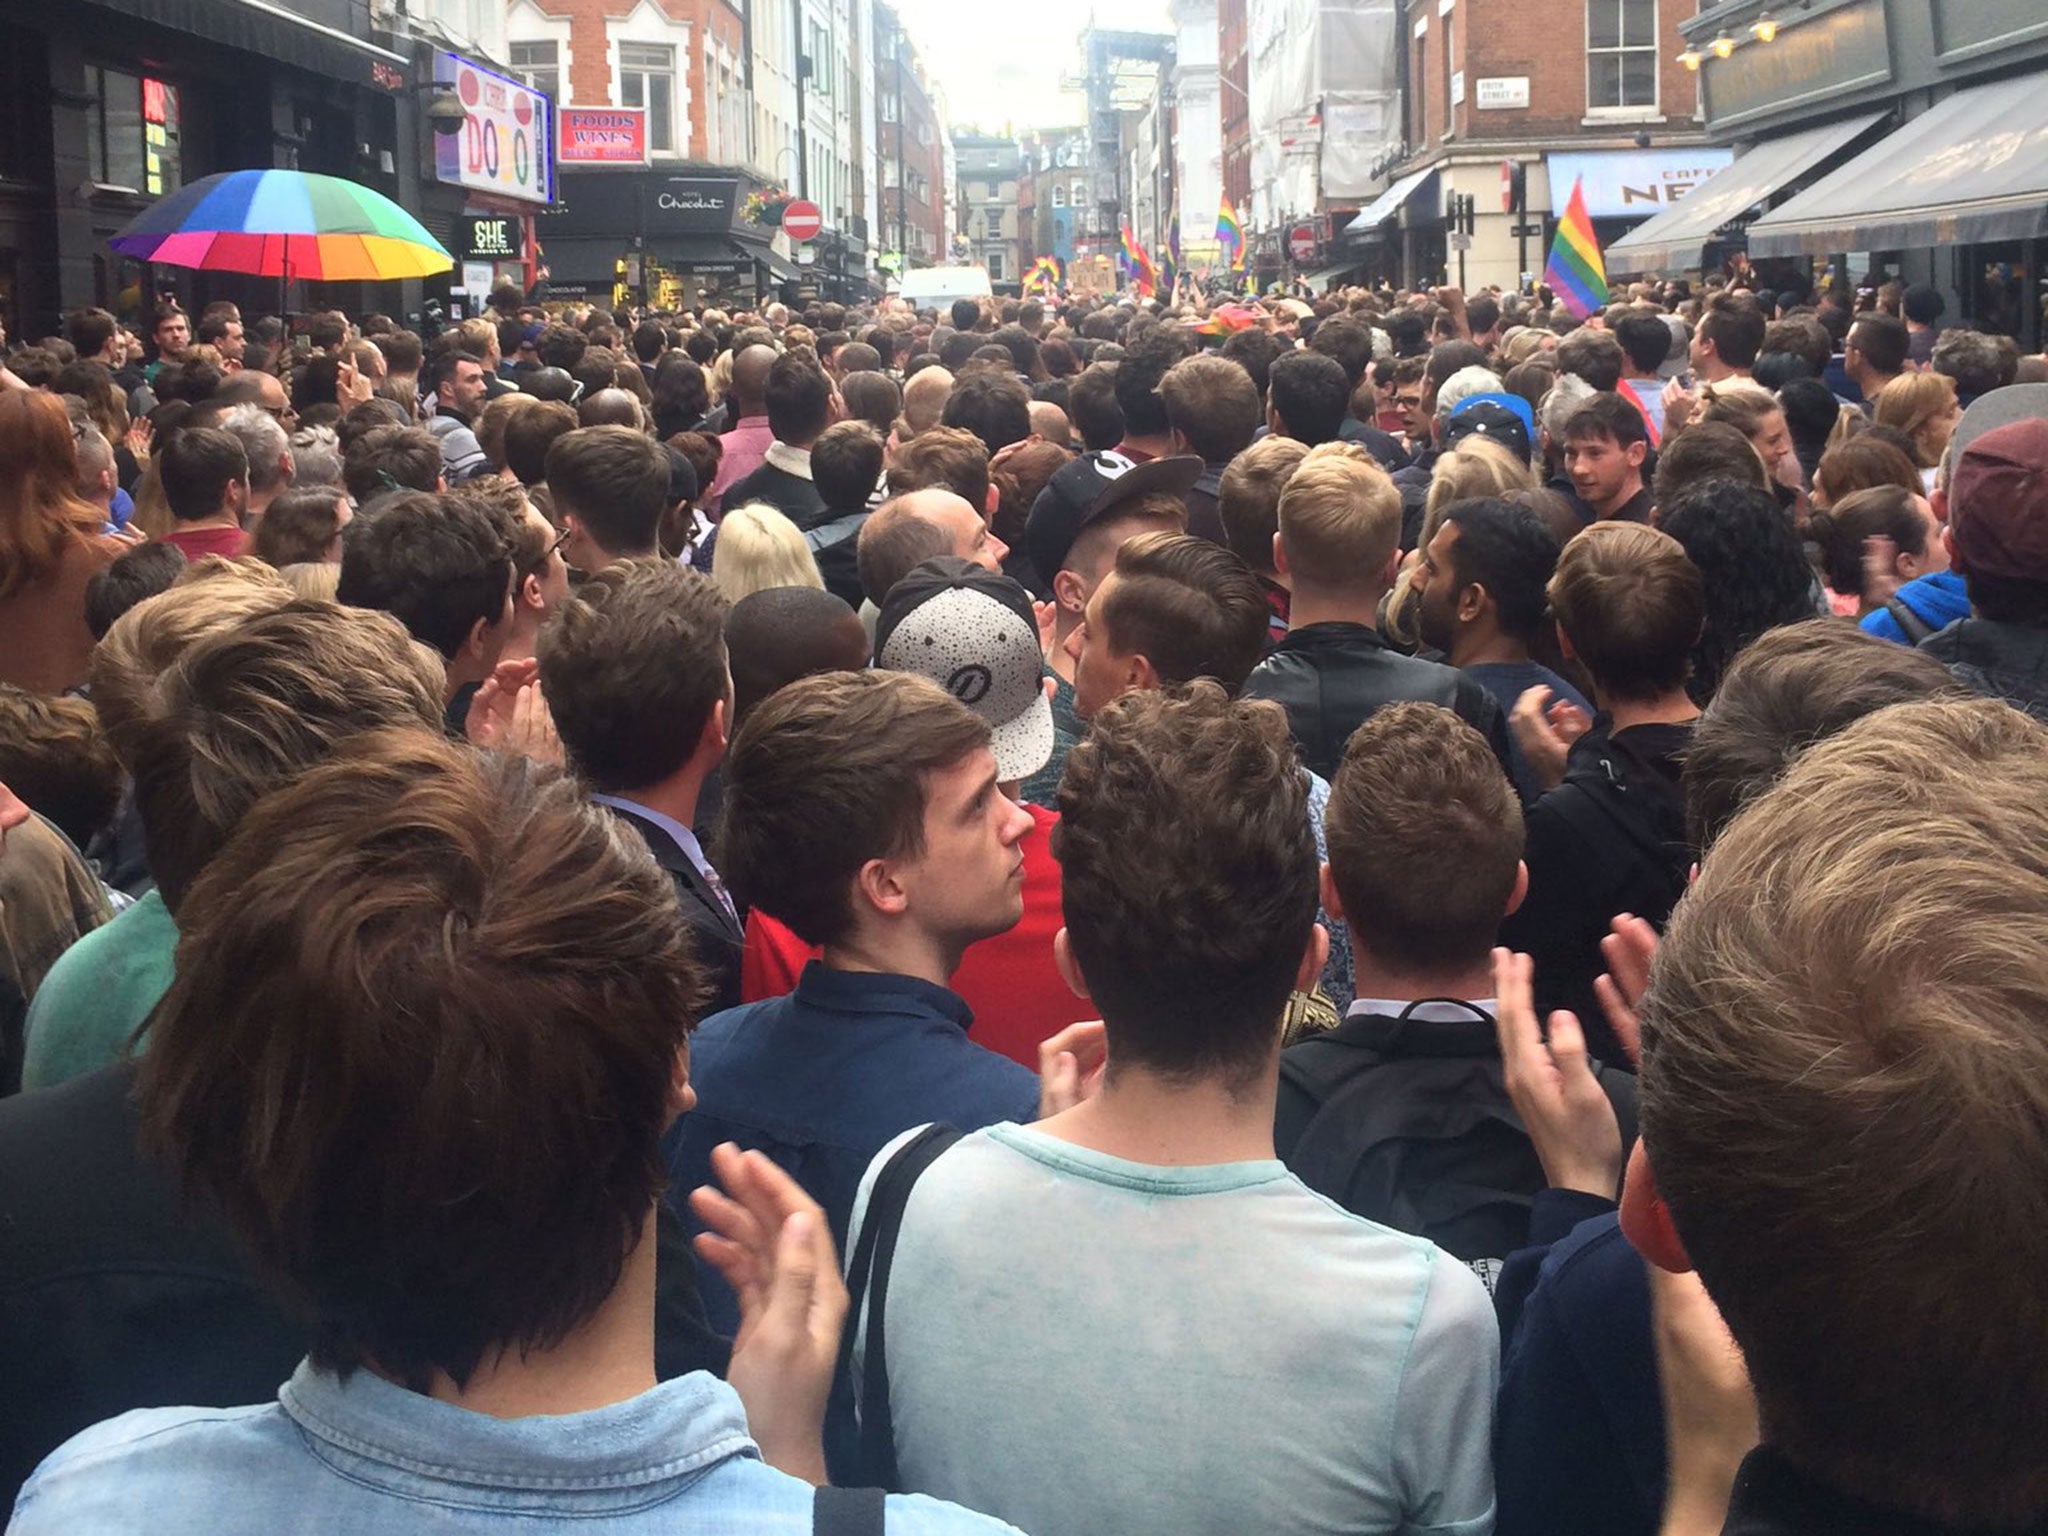 Thousands flocked to London's Old Compton Street to remember the victims of Orlando